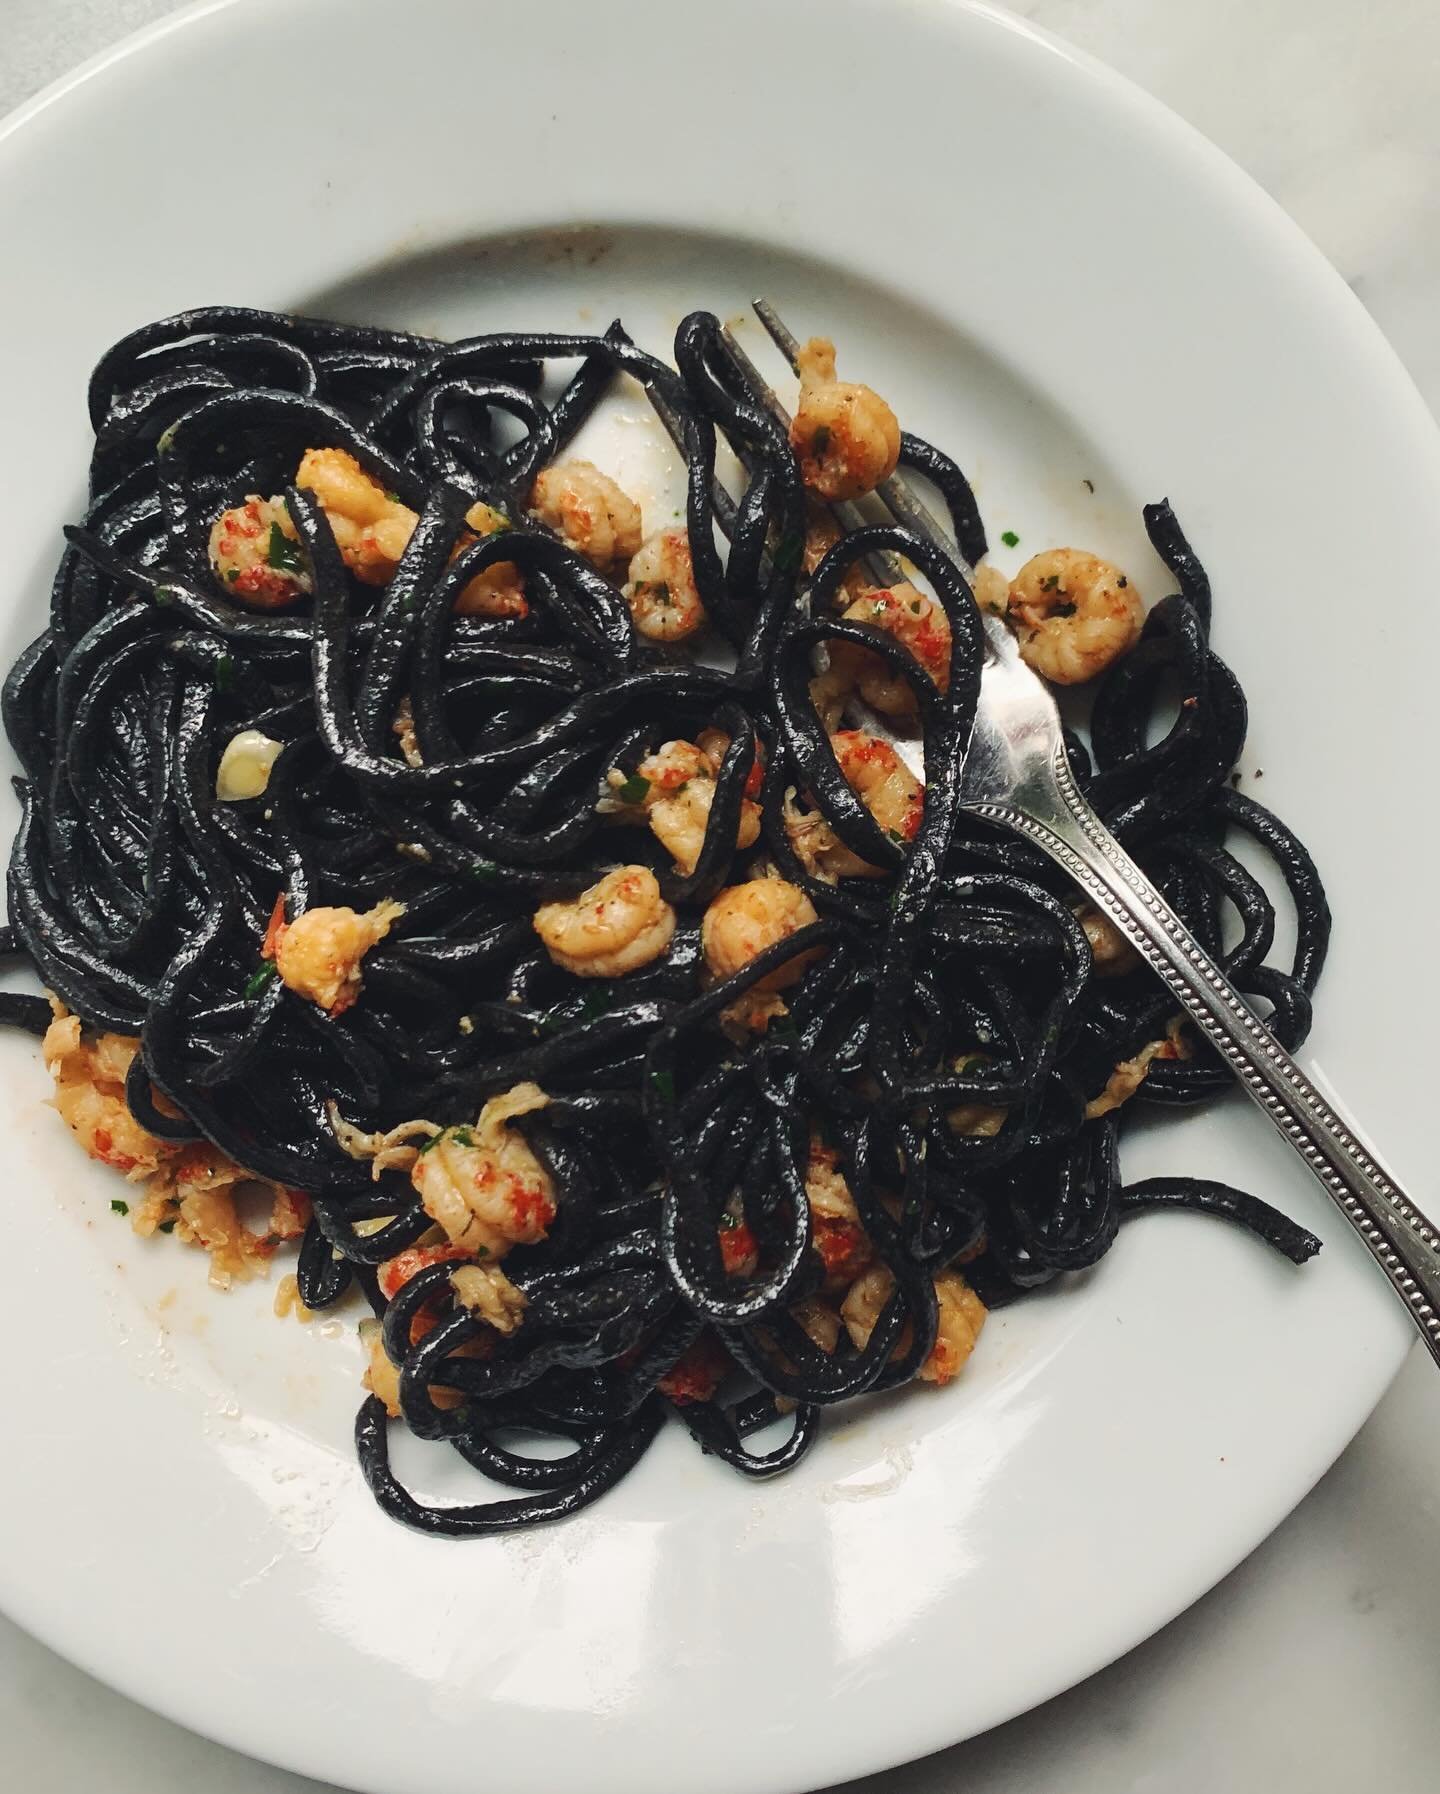 My kid @nickvance_birds made the cuttlefish 🦑 ink pasta from The Glorious Pasta of Italy 🇮🇹 In the book, the recipe is dressed with crab 🦀 rag&ugrave;. He used crawfish 🦞and it was 🔥🖤
.
Process video in my stories 🦑
.
.
.
#chitarra #spaghetti